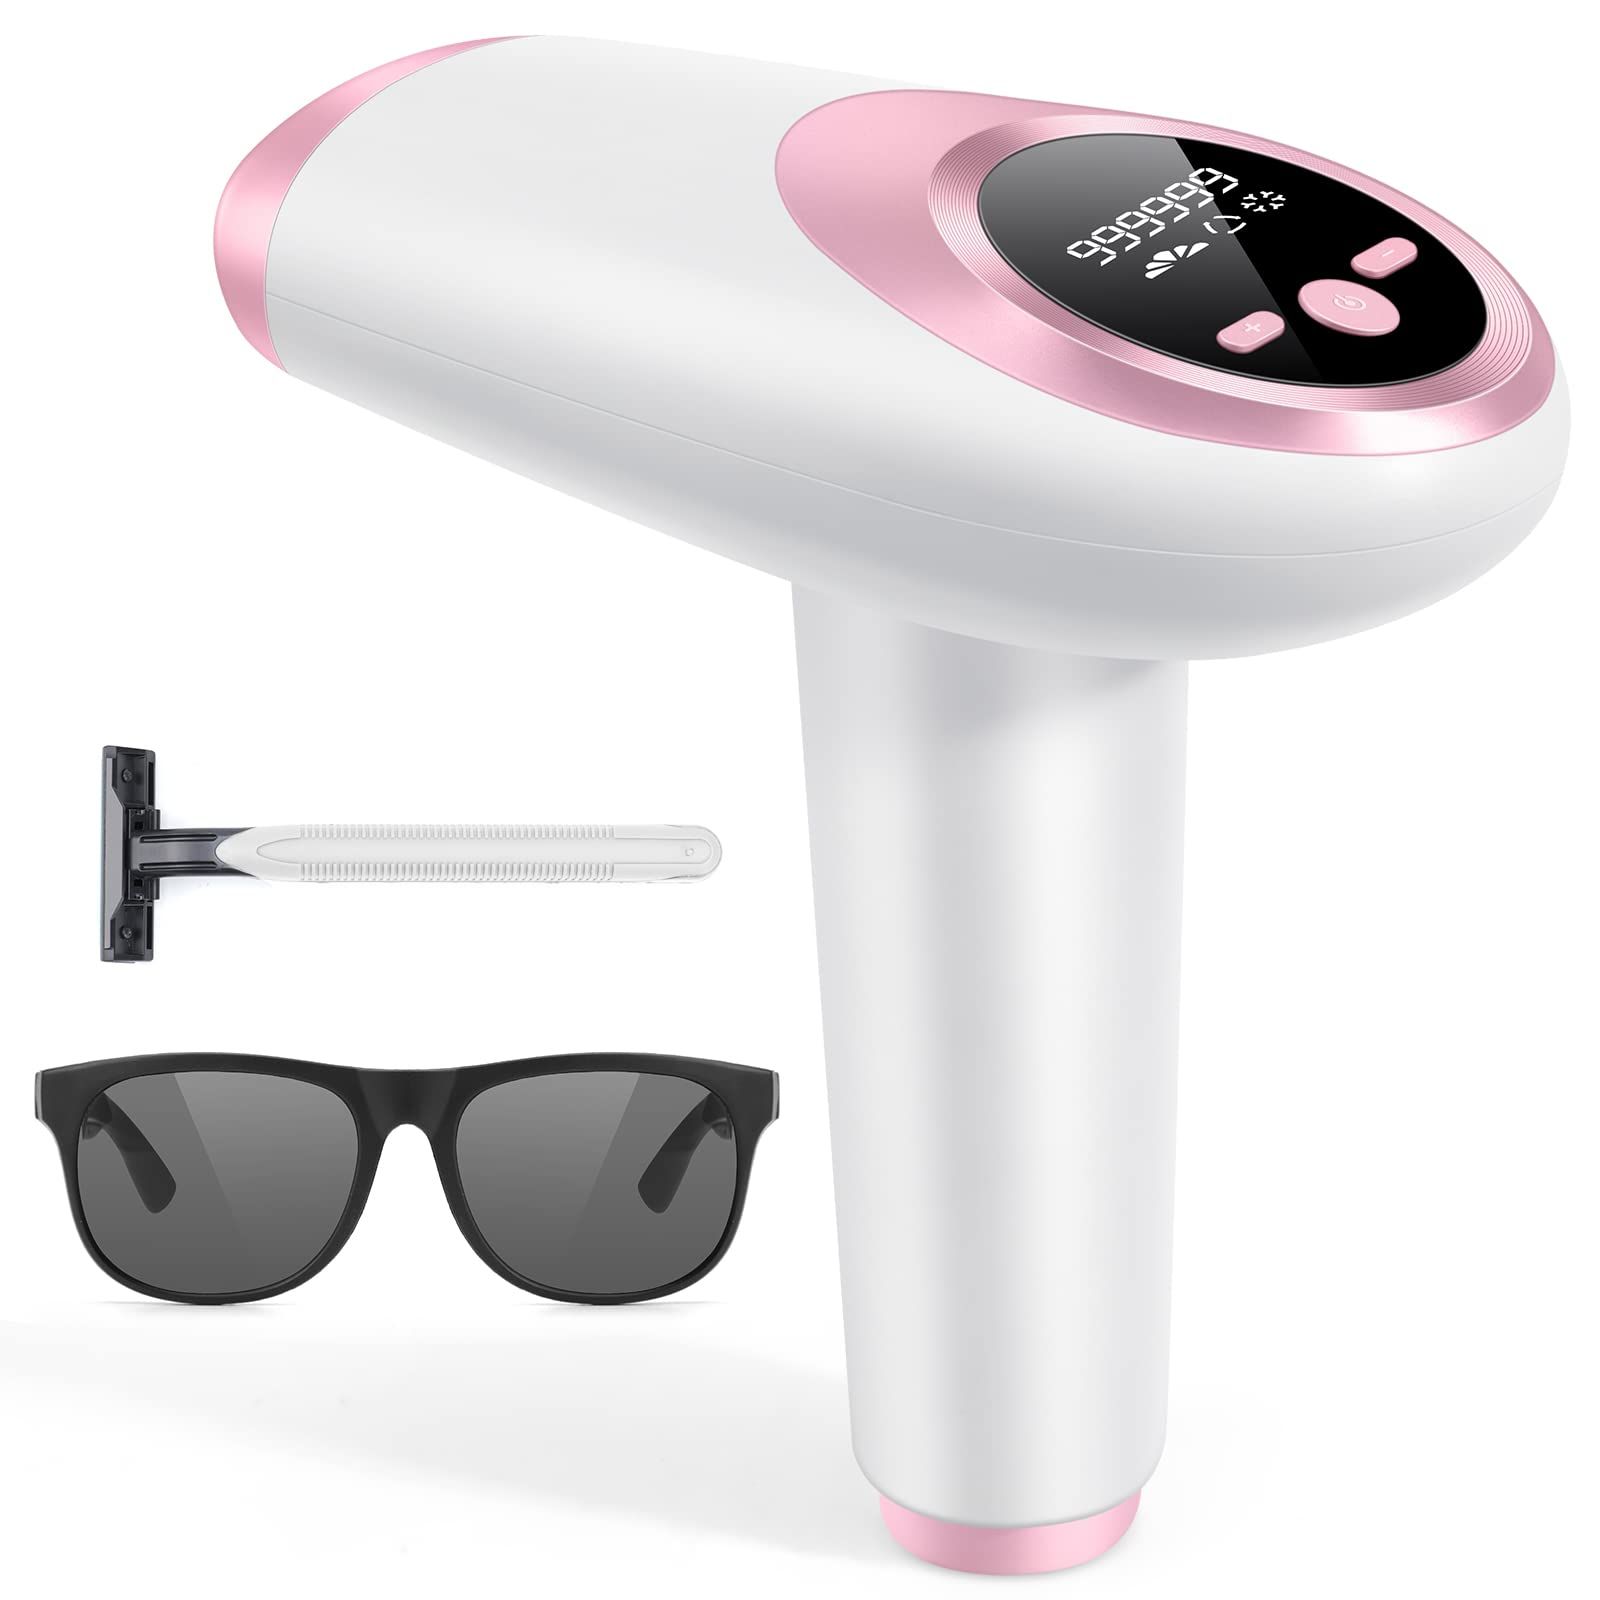 Buy Mago Laser Ipl Hair Removal MAChine For Face And Body Online at Low  Prices in India - Amazon.in